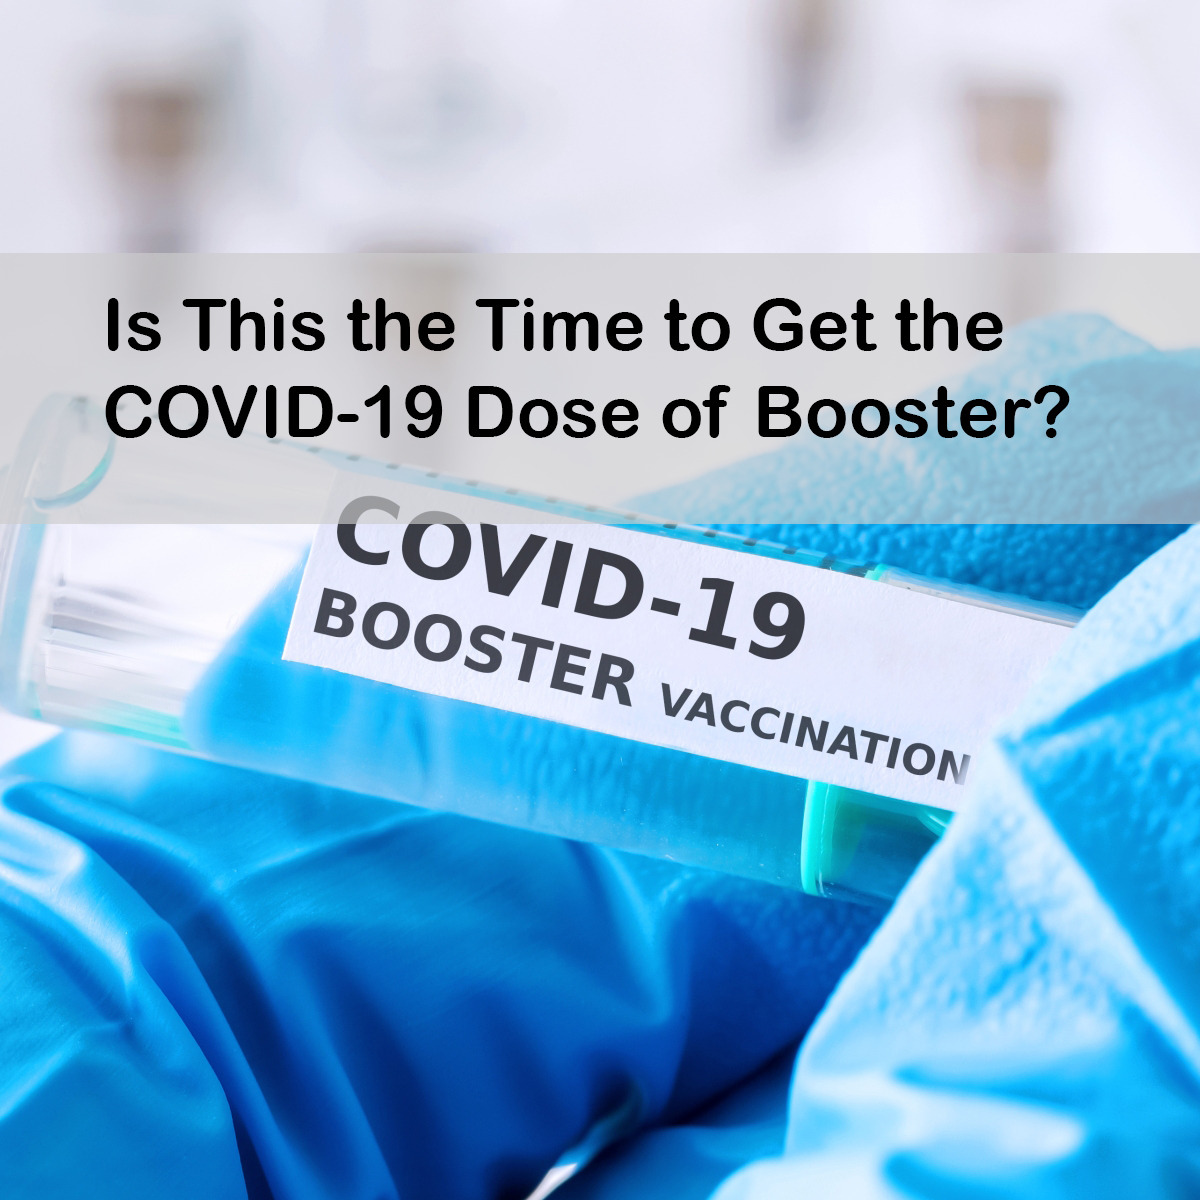 Is This the Time to Get the COVID-19 Dose of Booster?